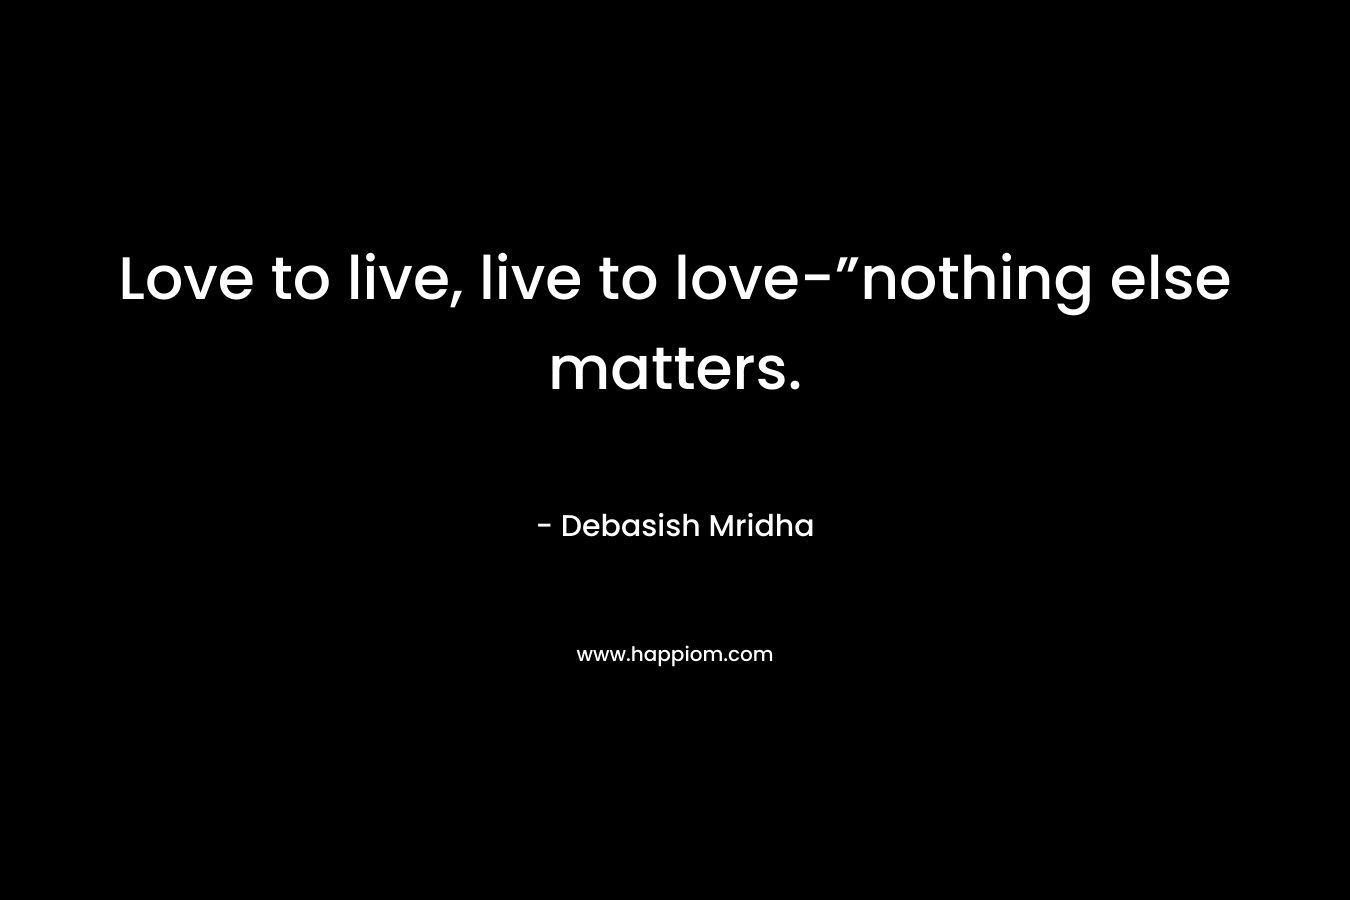 Love to live, live to love-”nothing else matters.